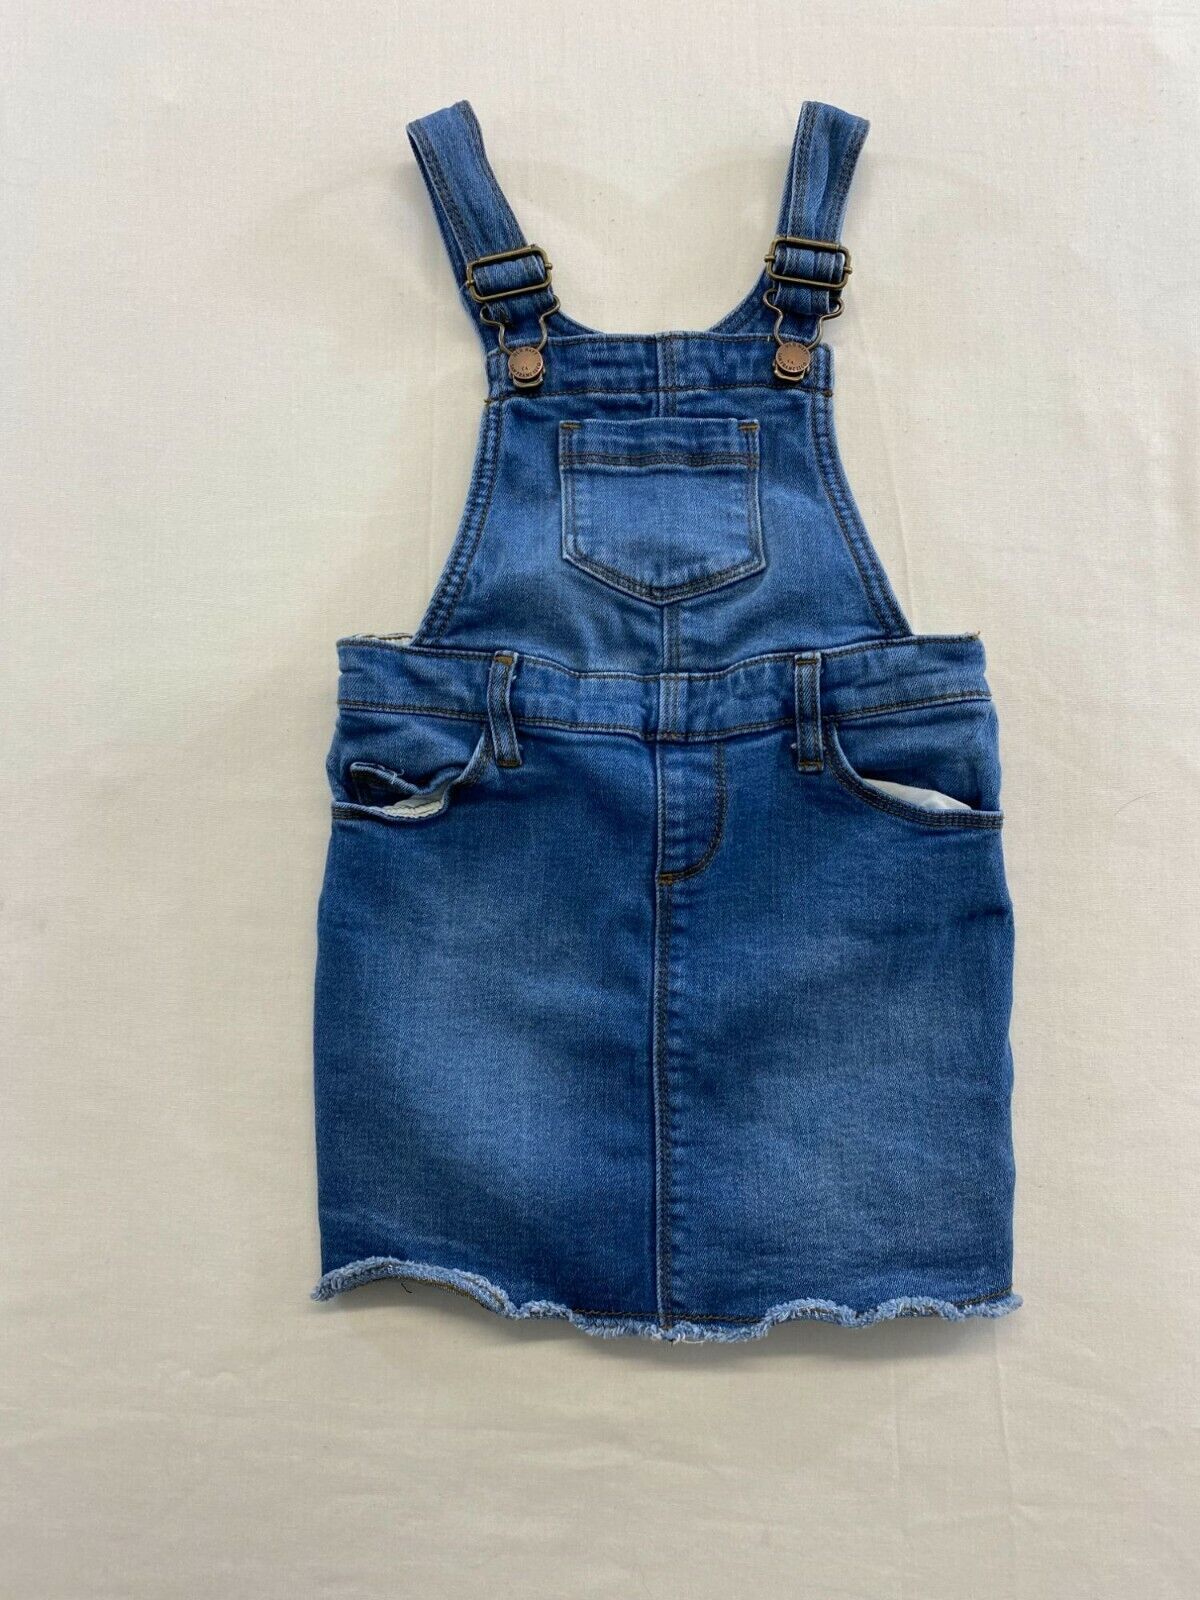 Primary image for Old Navy Bib Overall Romper Girls Size 4 T Blue Jean Stretch Cotton Blend